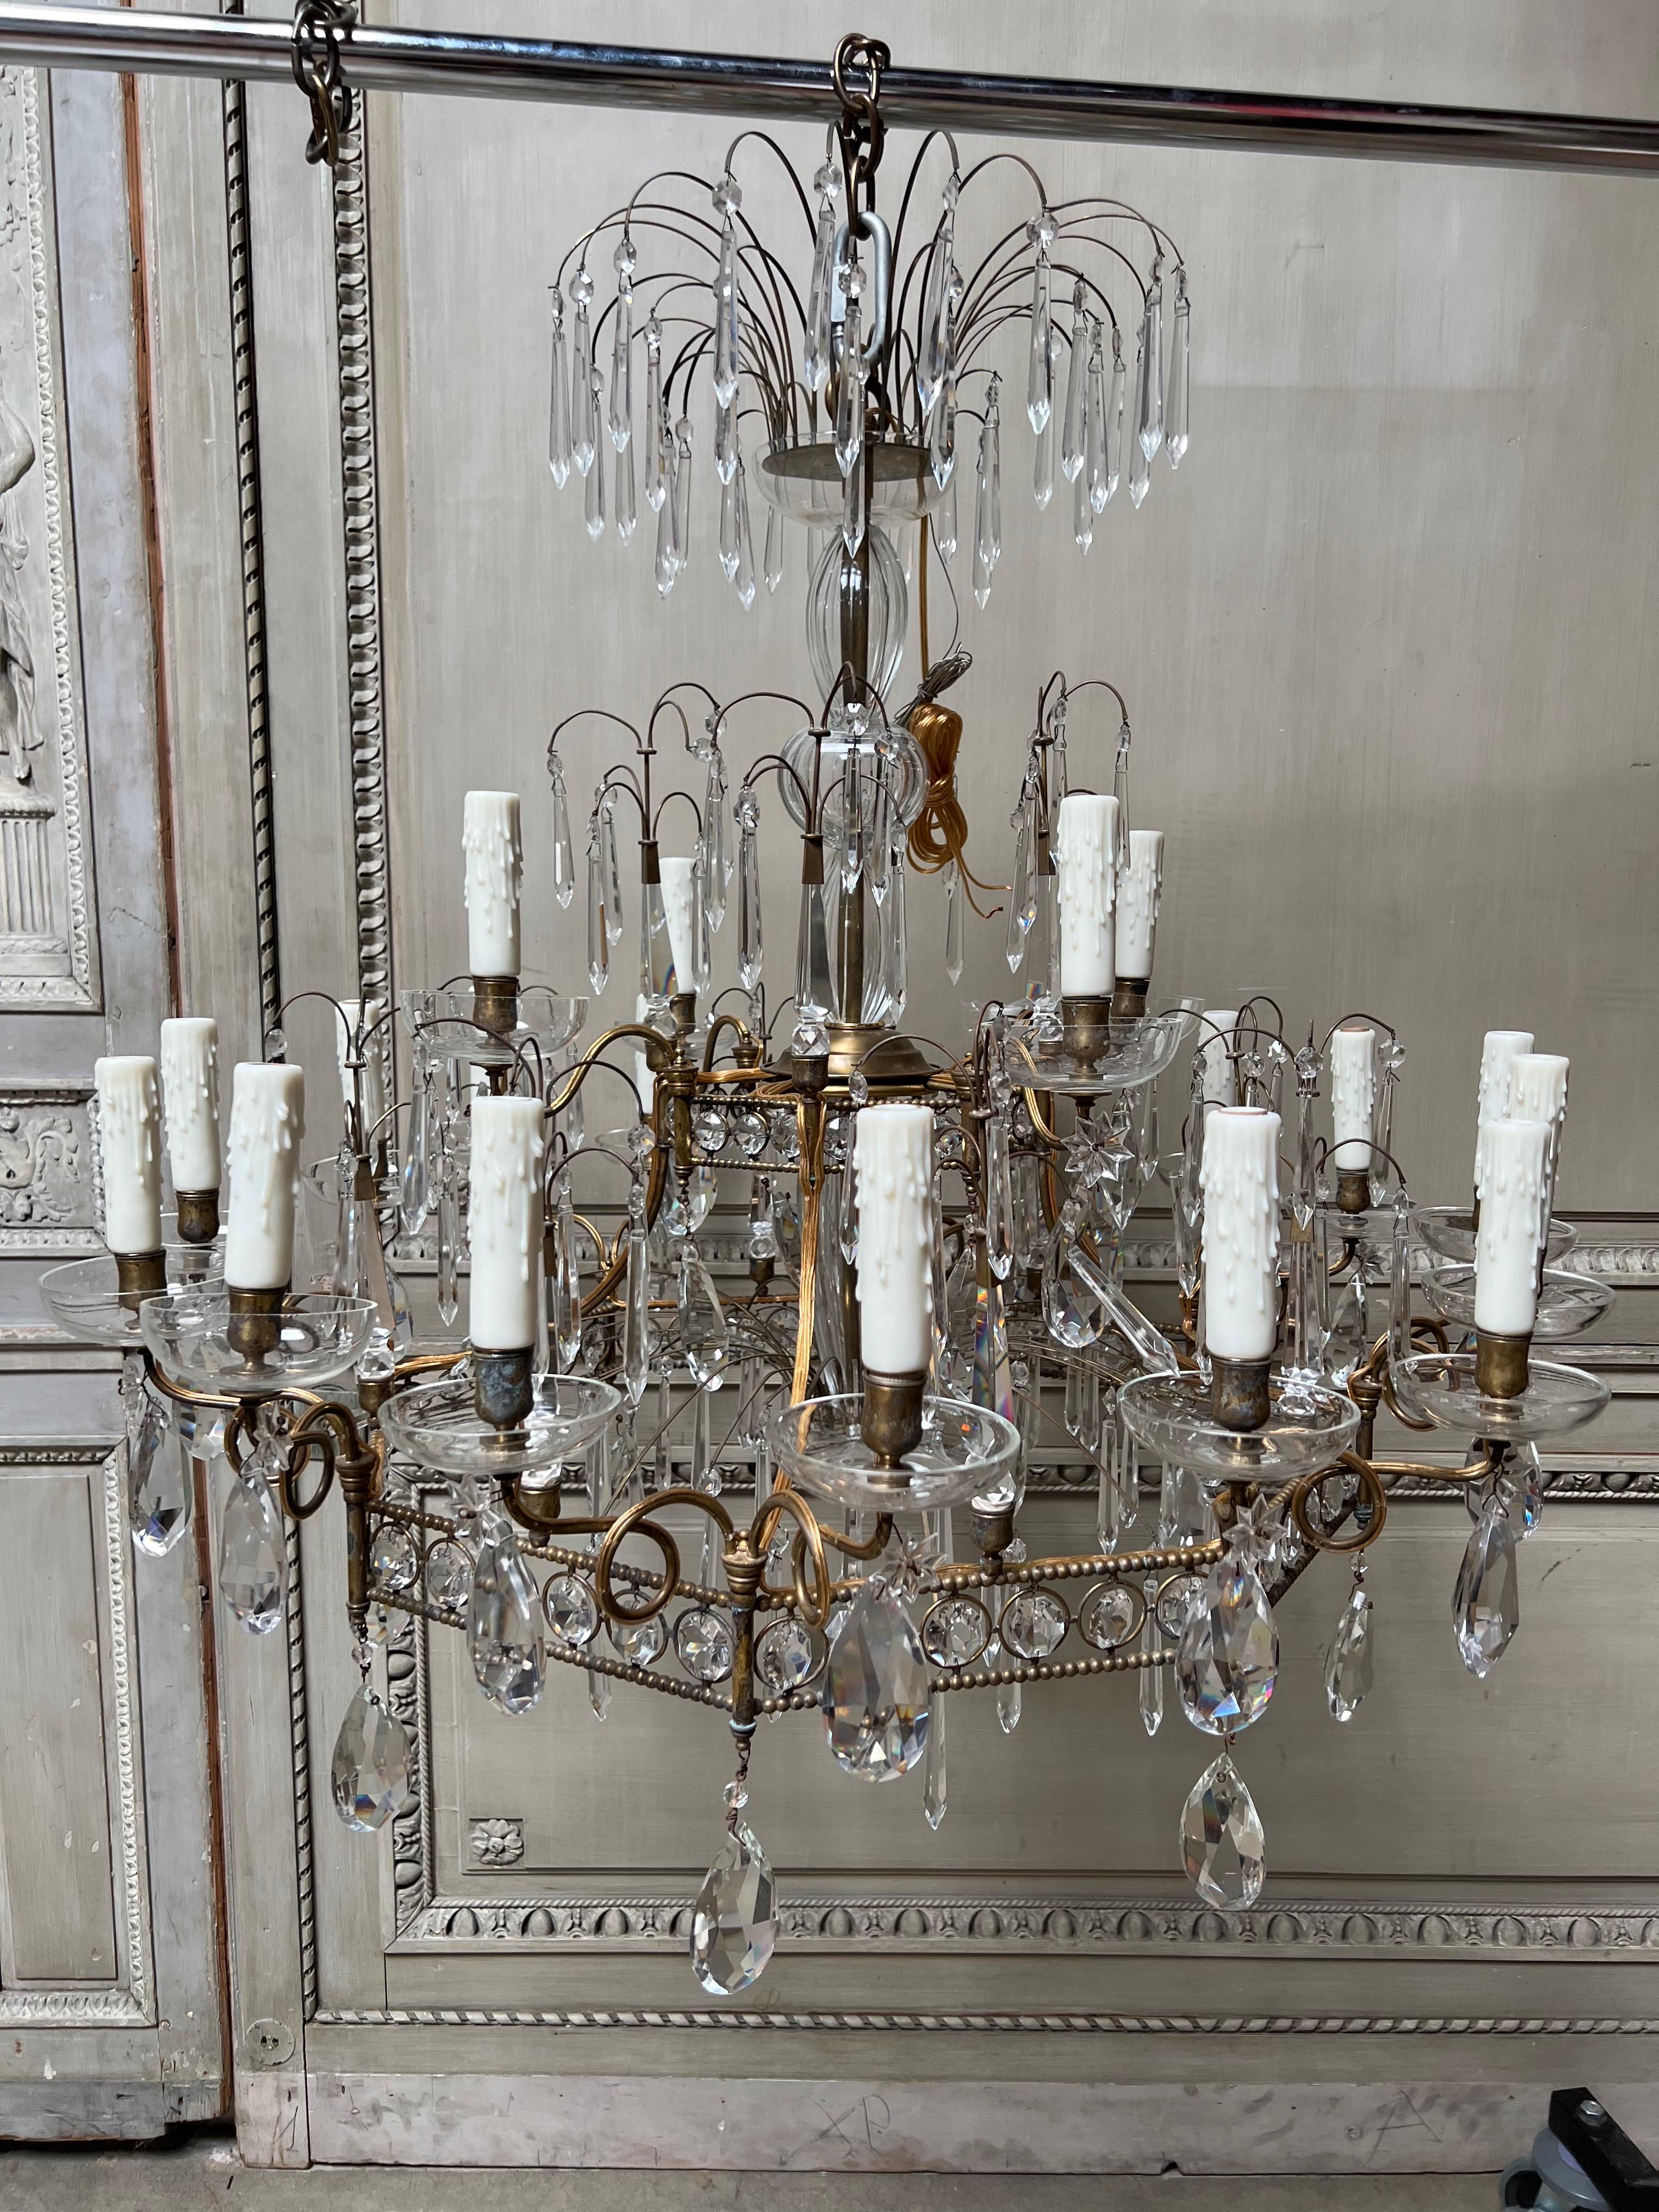 A large pair of Italian bronze and crystal chandeliers from the 1920's in the neoclassical-art deco style. These chandeliers are twenty lights each and are a beautiful, glamorous style. They are perfect for a large room.